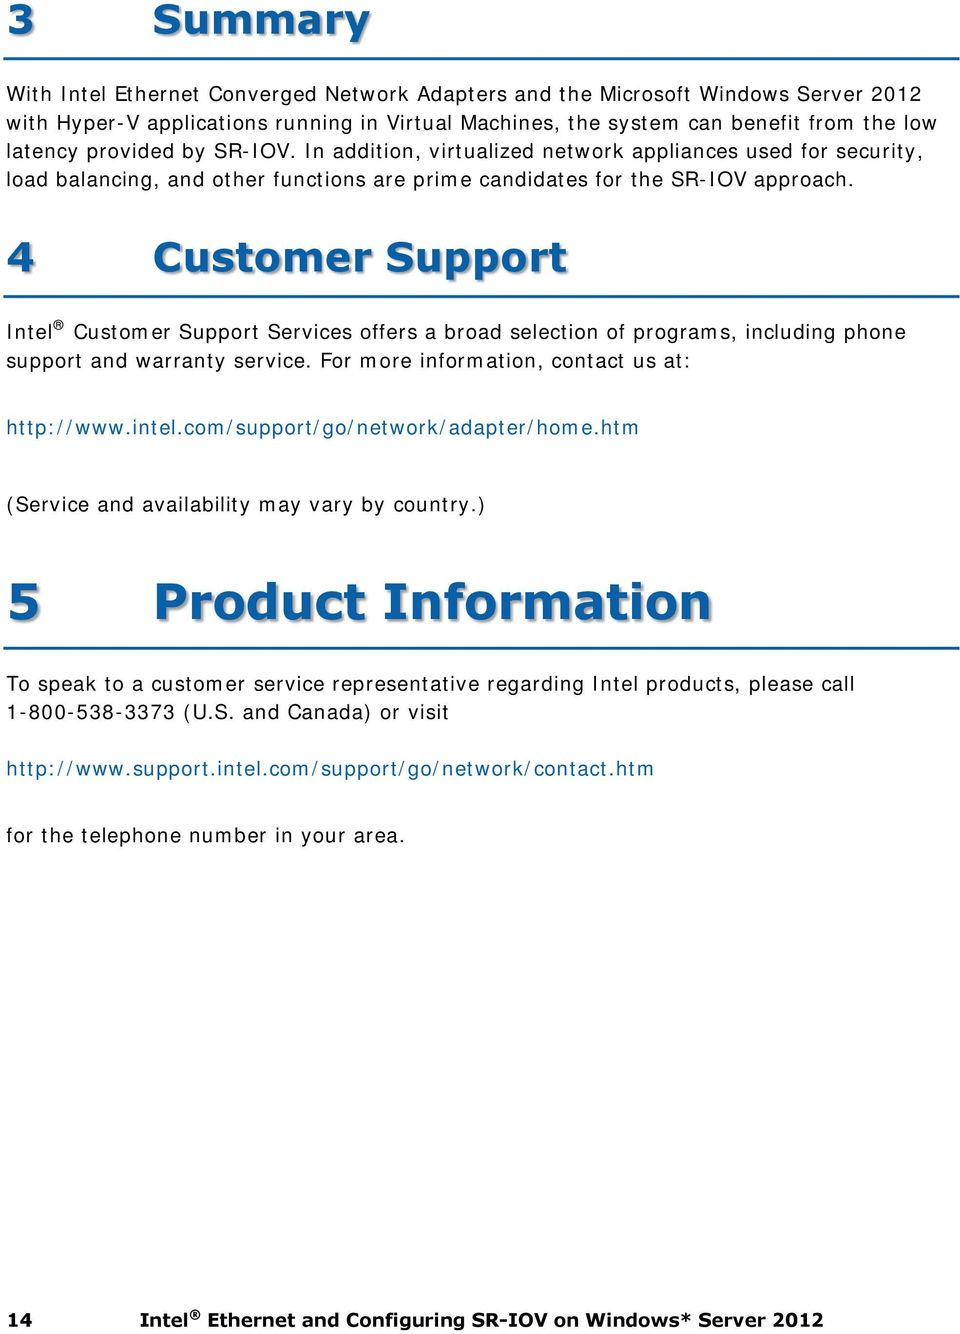 4 Customer Support Intel Customer Support Services offers a broad selection of programs, including phone support and warranty service. For more information, contact us at: http://www.intel.